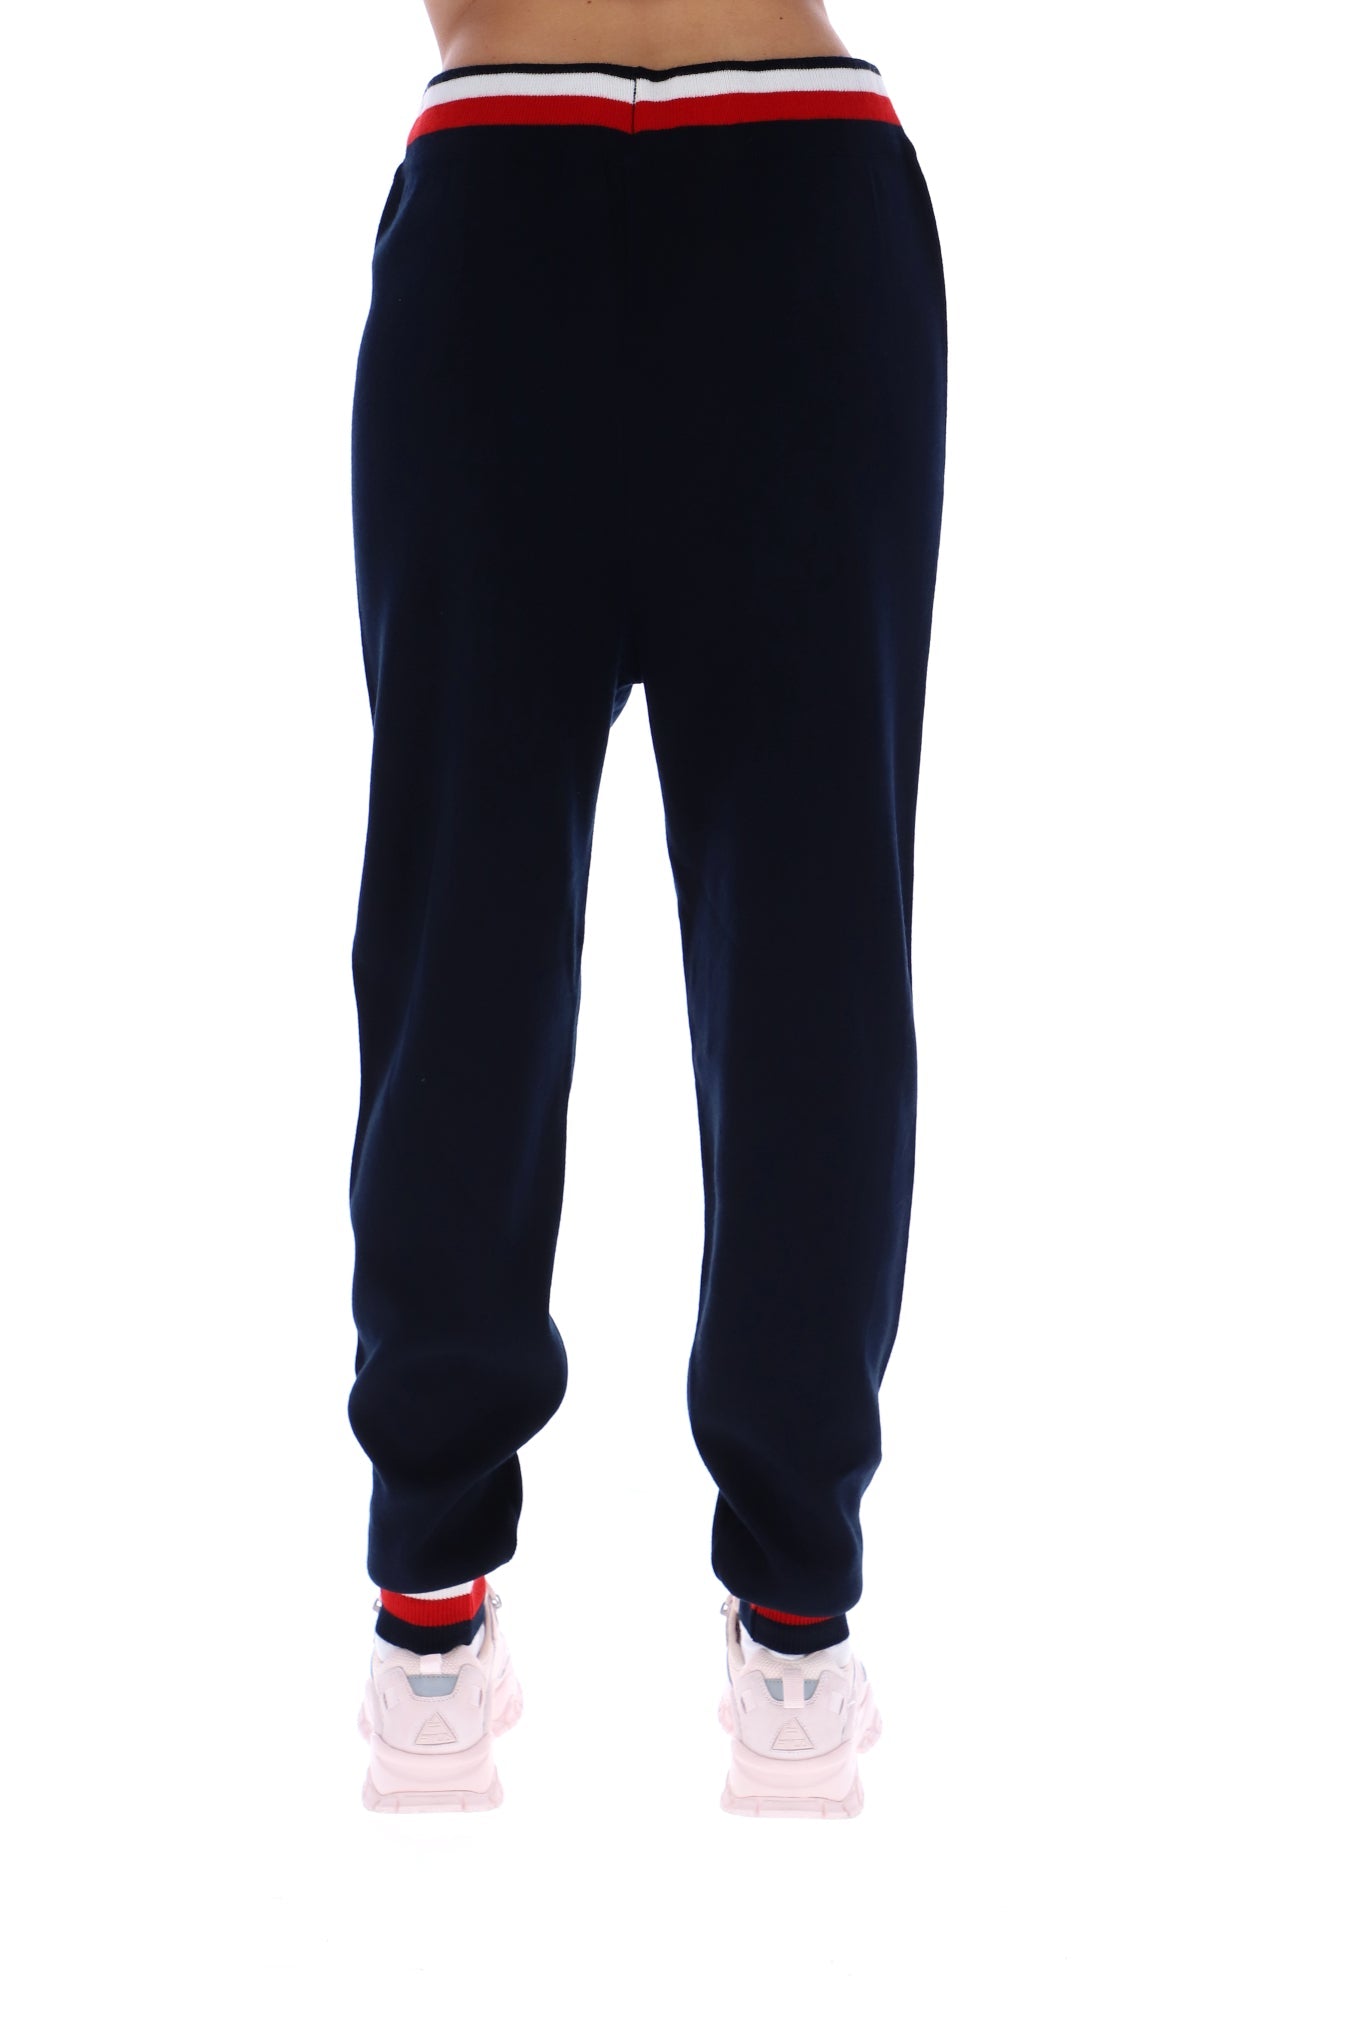 Ladies Frankie Navy/Red/White Knit Pant-Back View